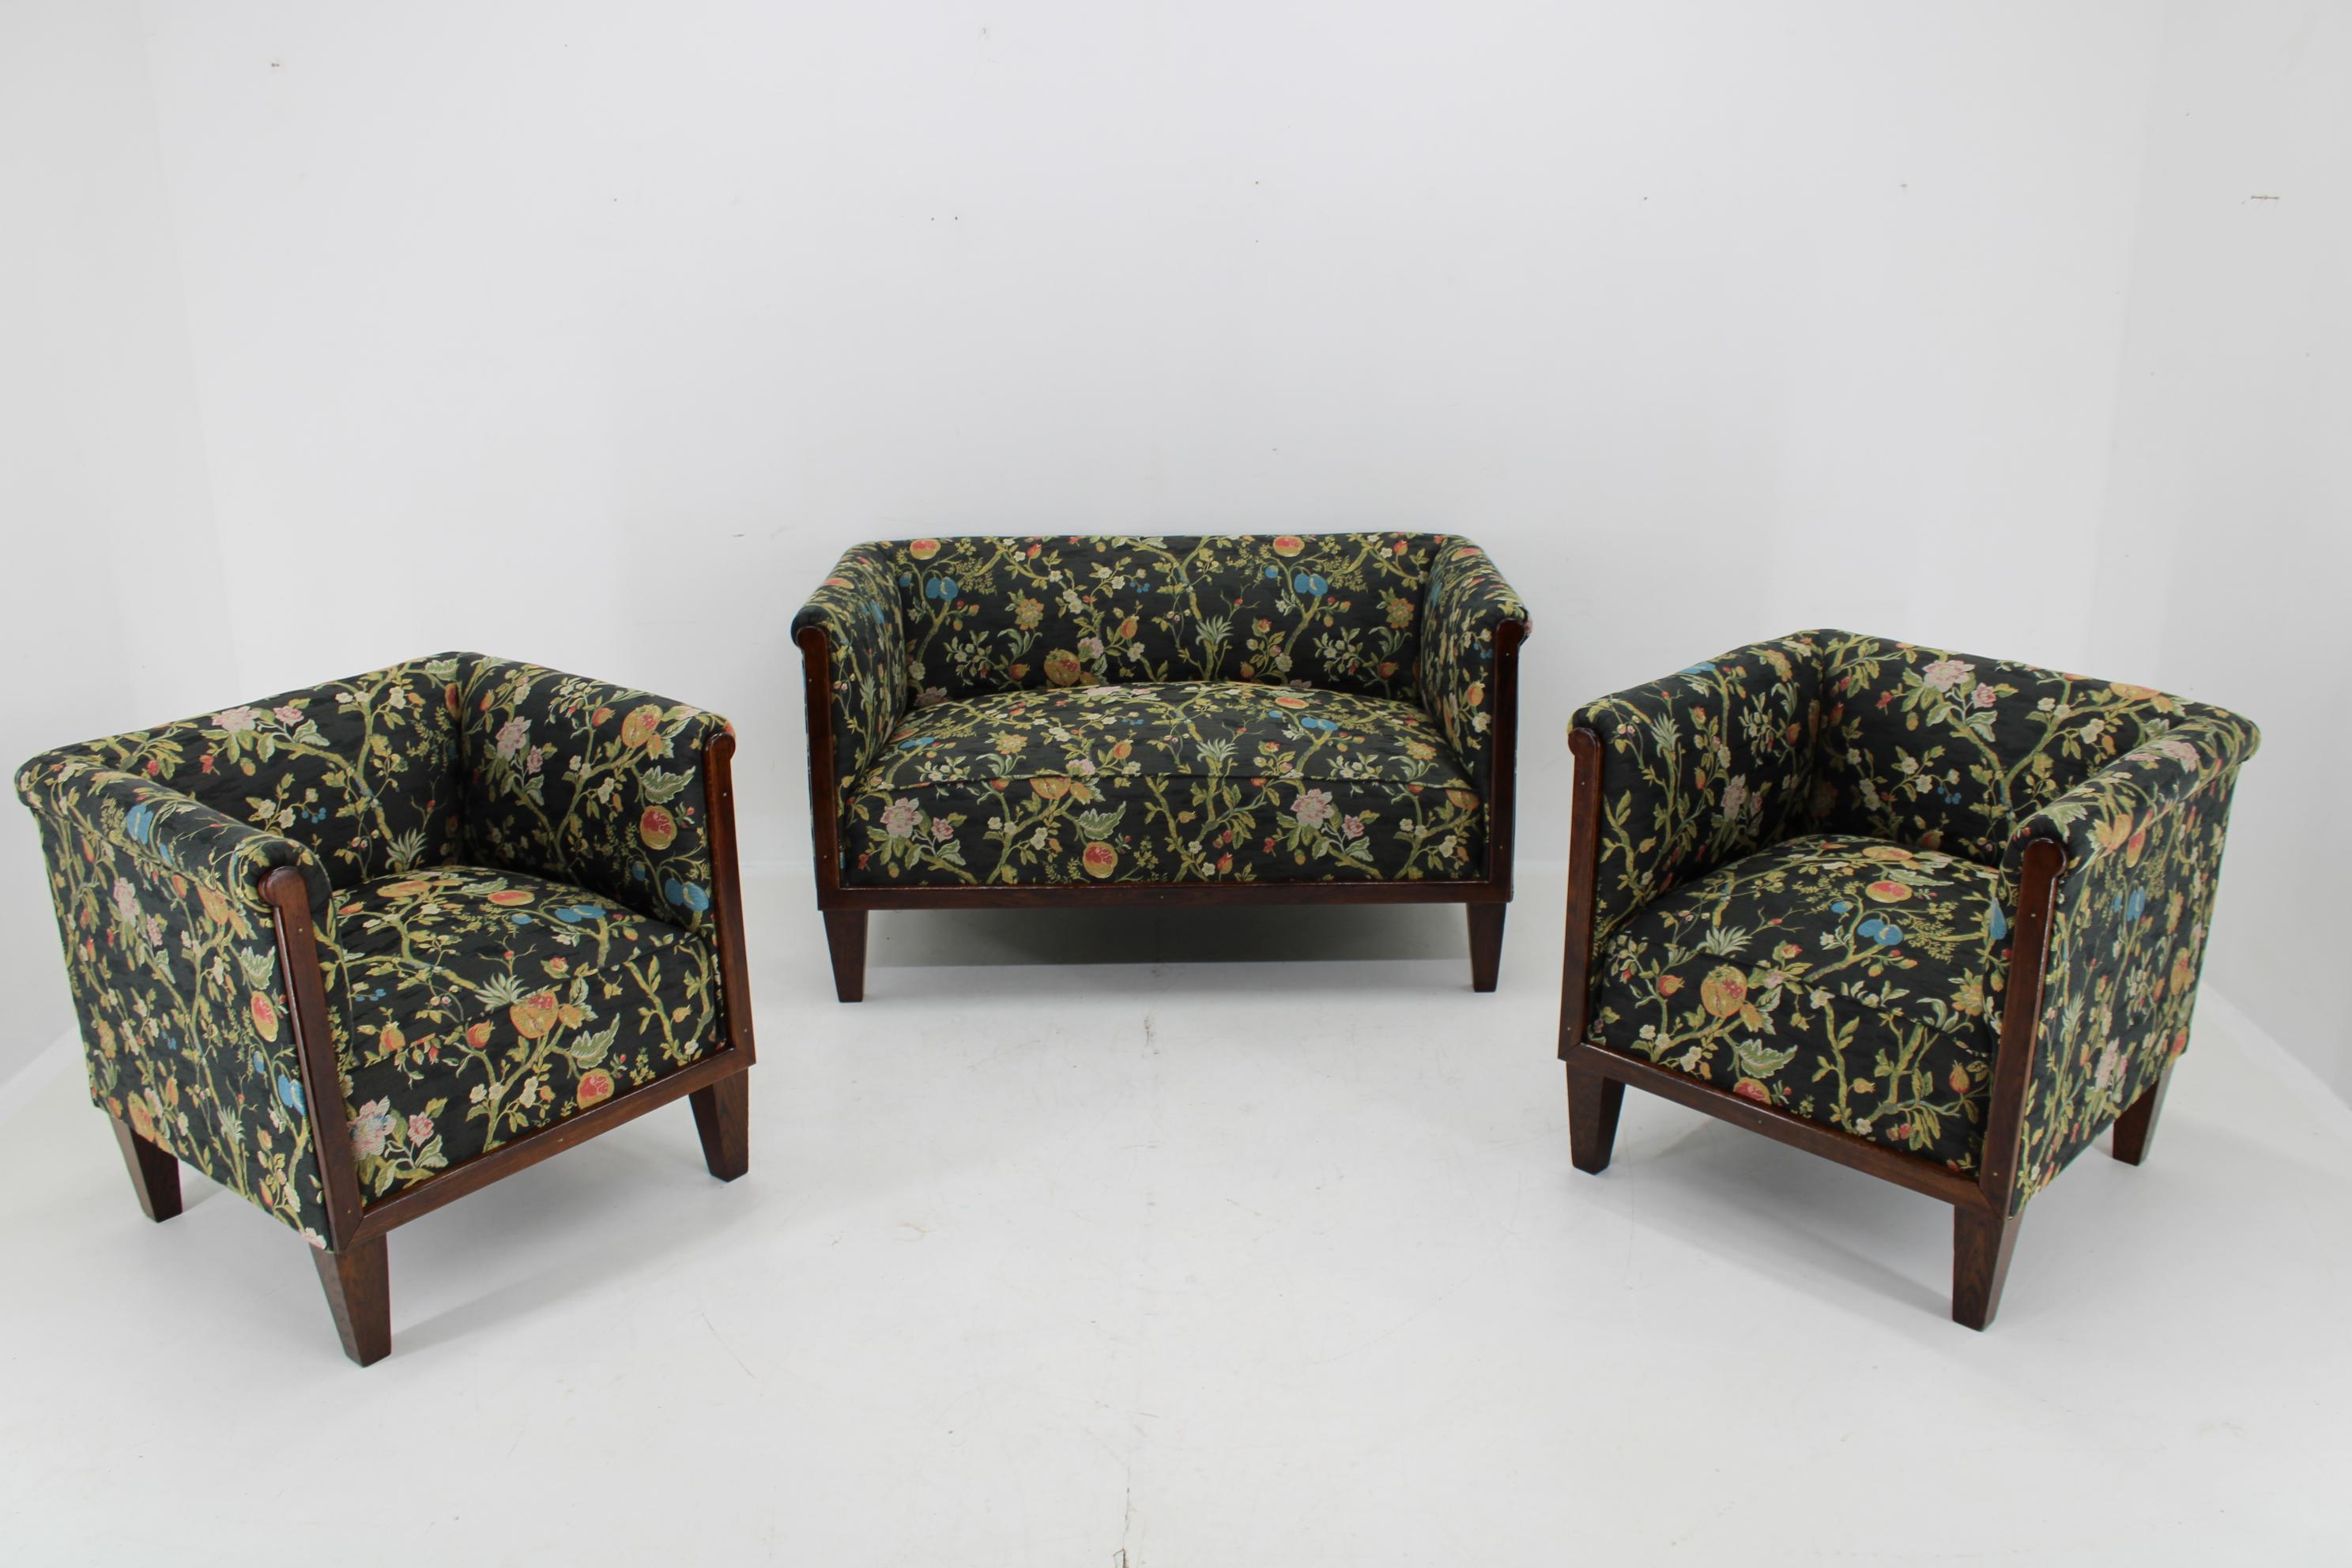 - newly upholstered in floral pattern fabric
- refinished oak wooden parts
- The armchair dimensions : Height : 78cm , Seat height : 46cm ,Width: 80cm ,Depth 75cm 